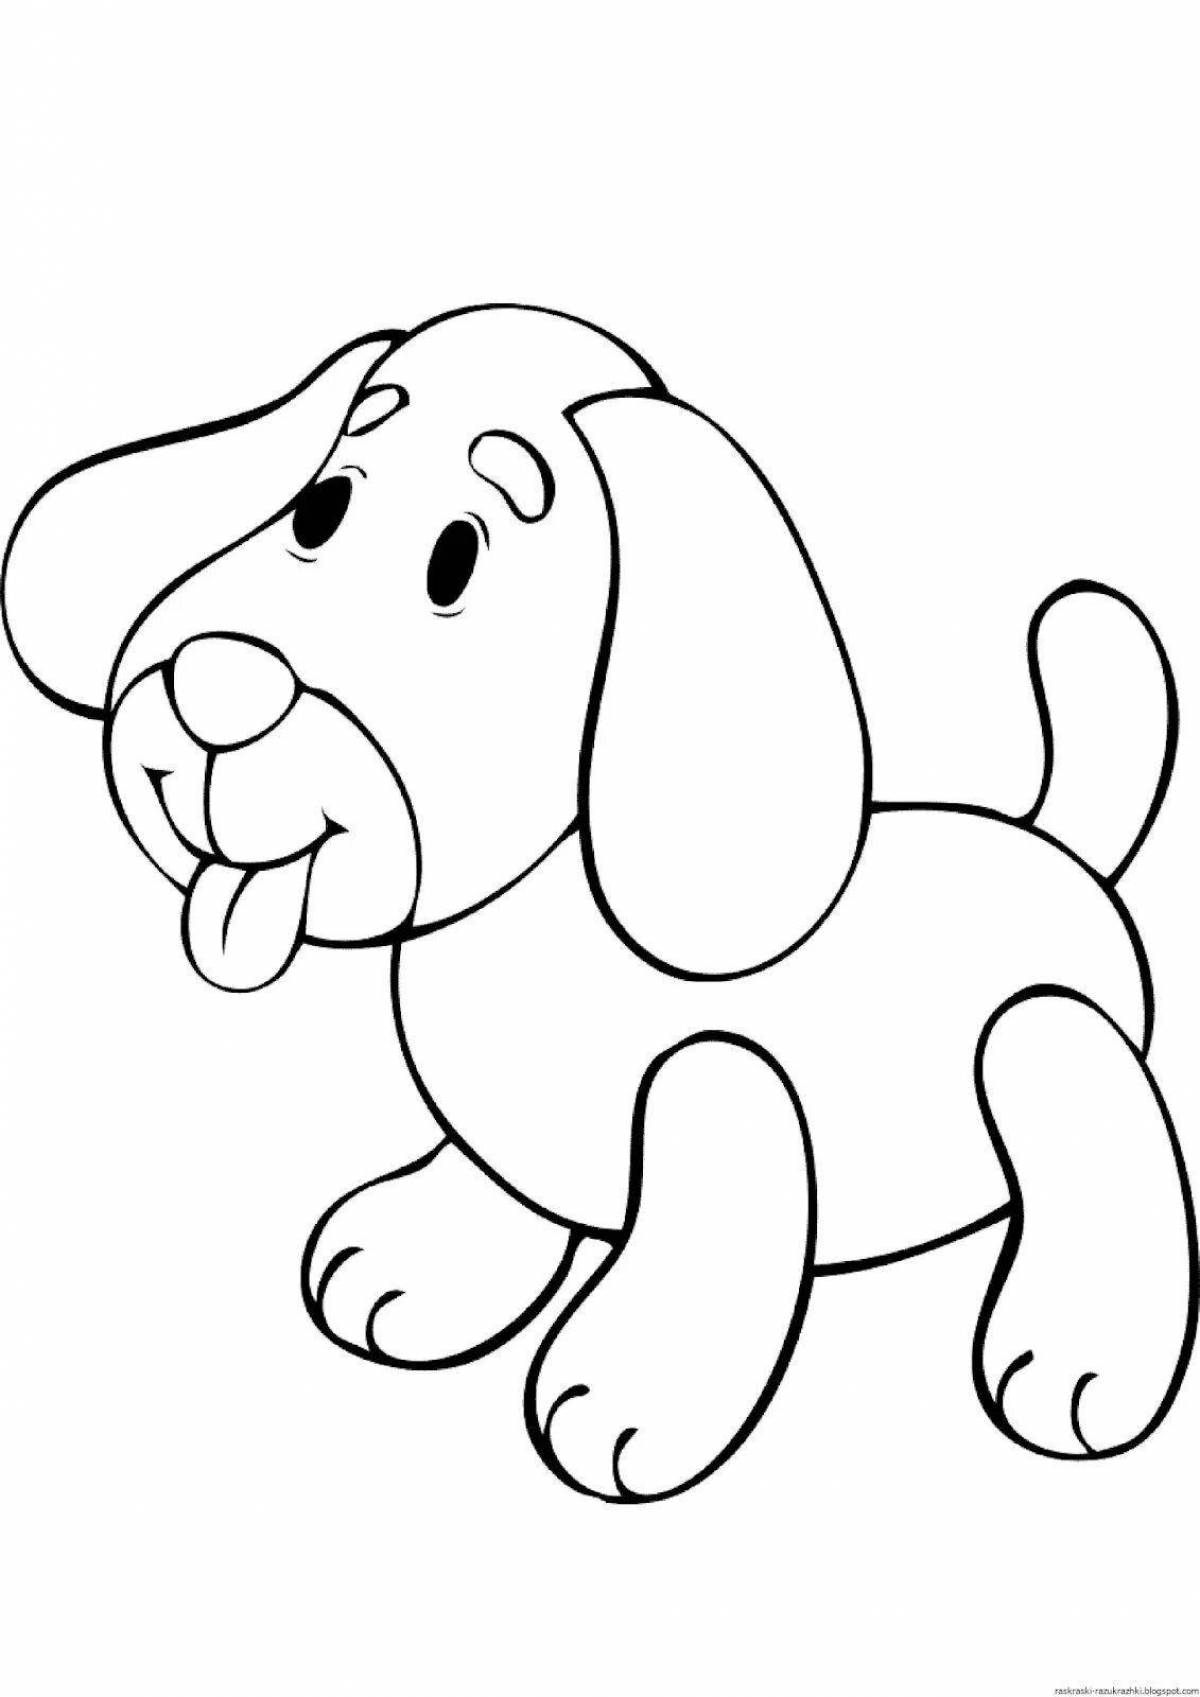 Fun coloring book for 3-4 year olds: simple animals